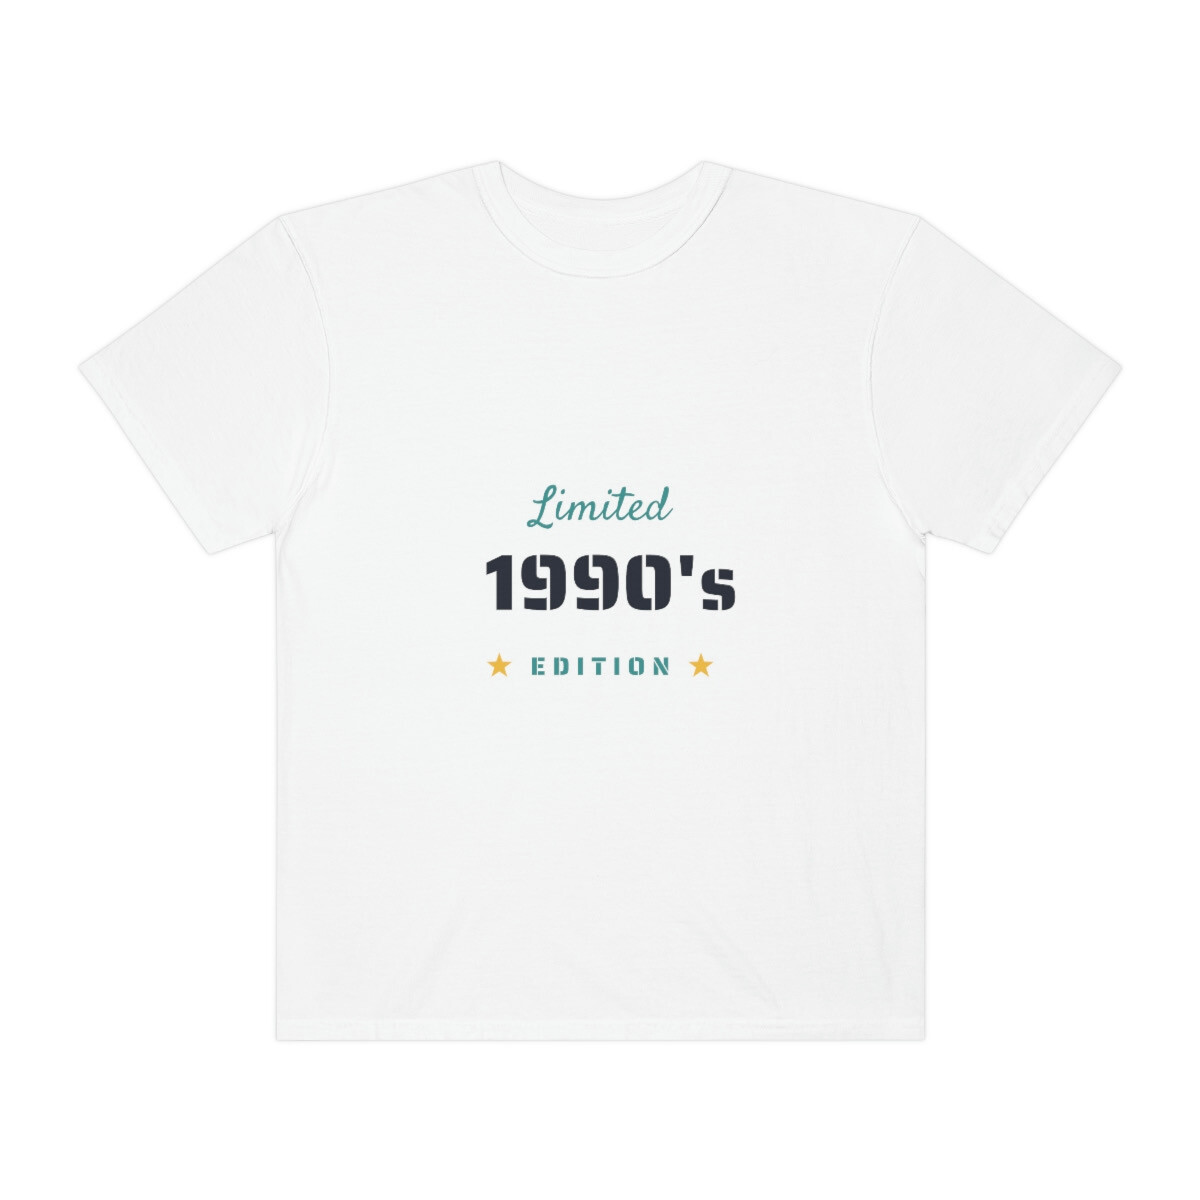 Limited 199O's Edition T-shirts (Free Shipping)